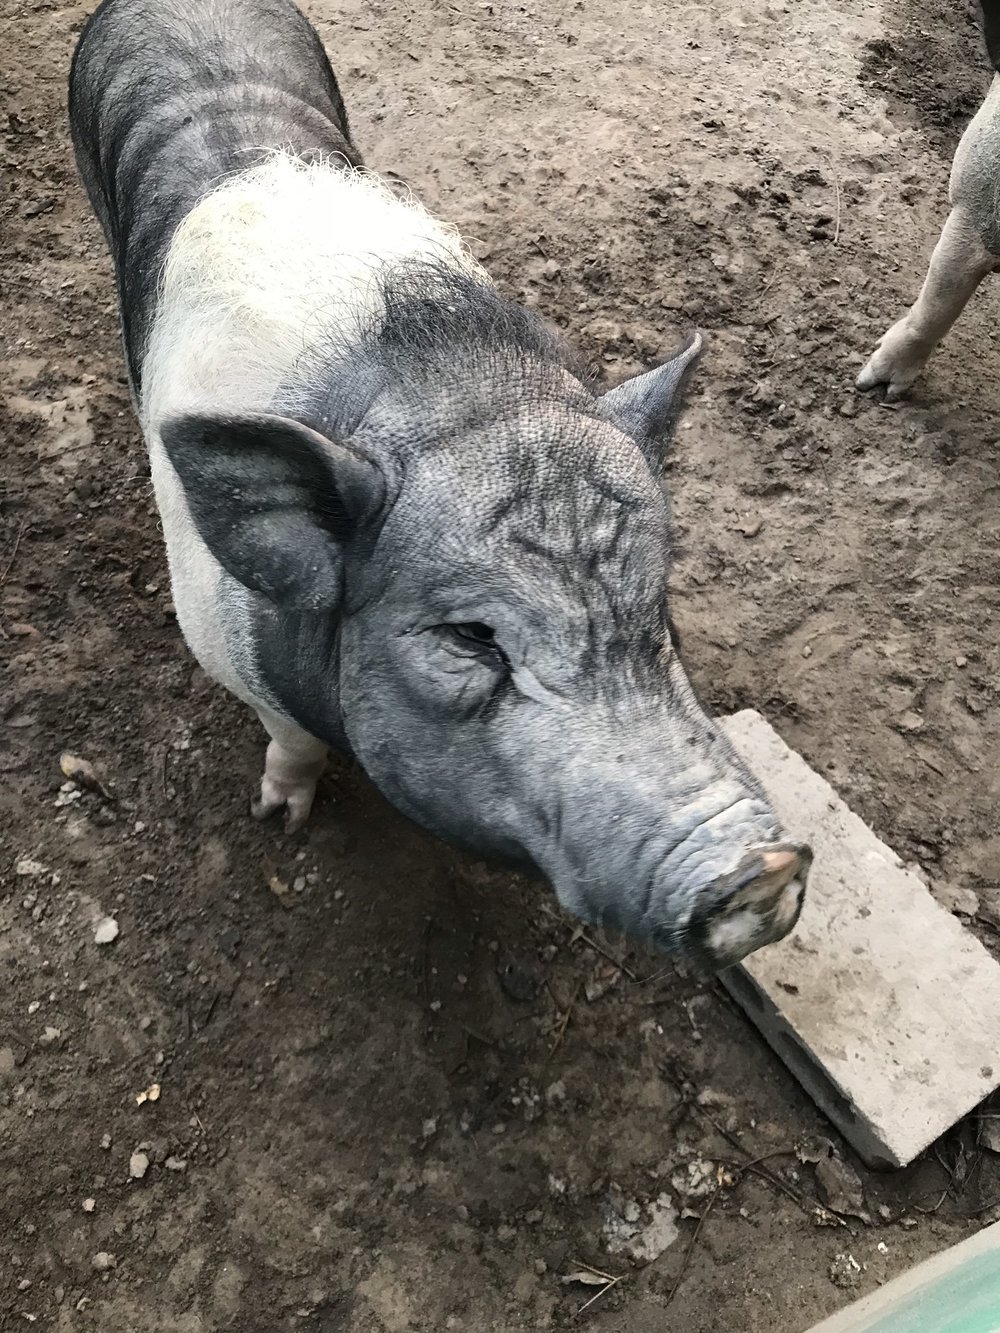 One of the many piggies at WFFT